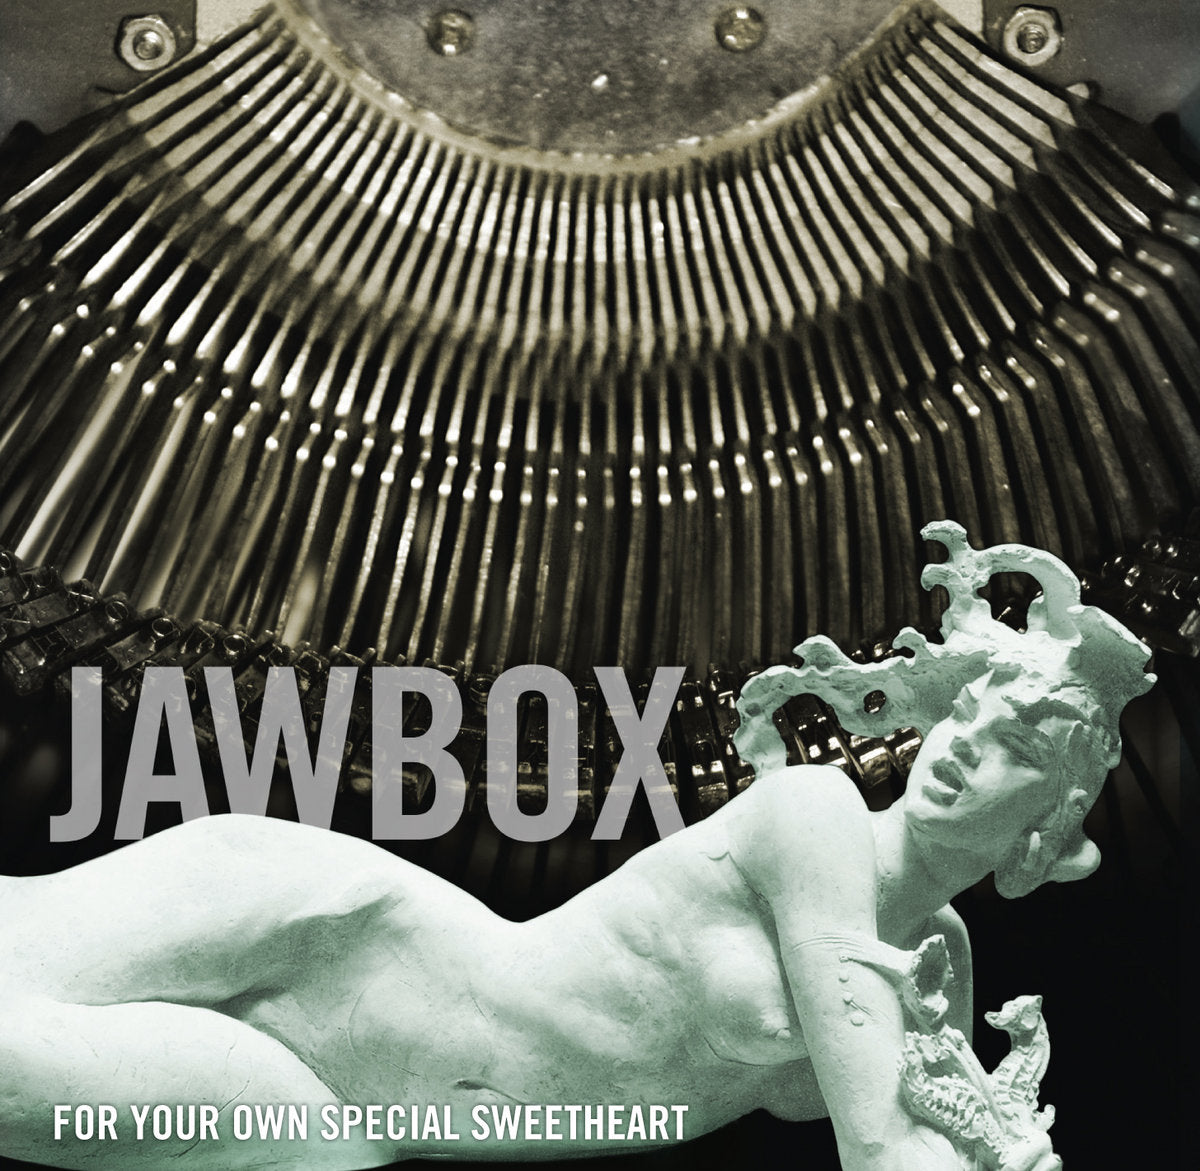 JAWBOX 'For Your Own Special Sweetheart' LP